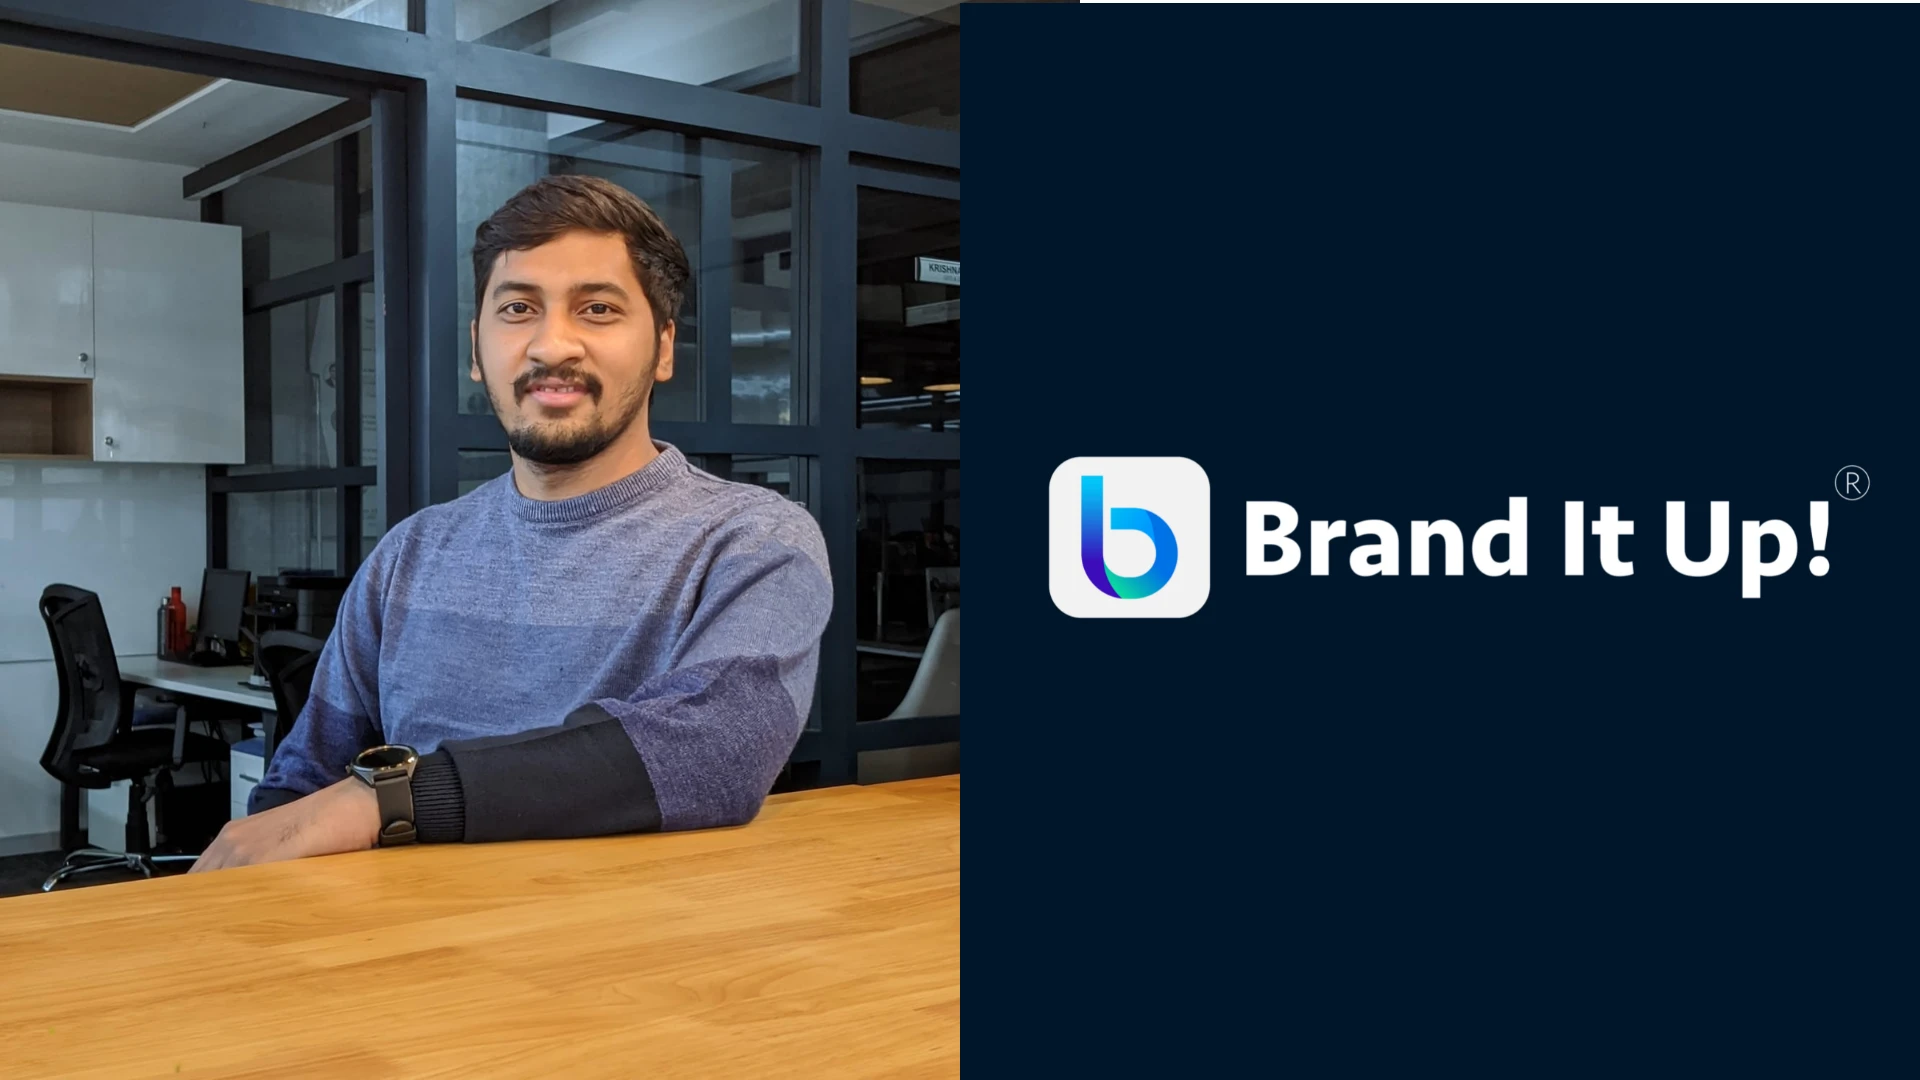 Brand It Up is Helping Small Businesses Grow With Affordable Digital Solutions